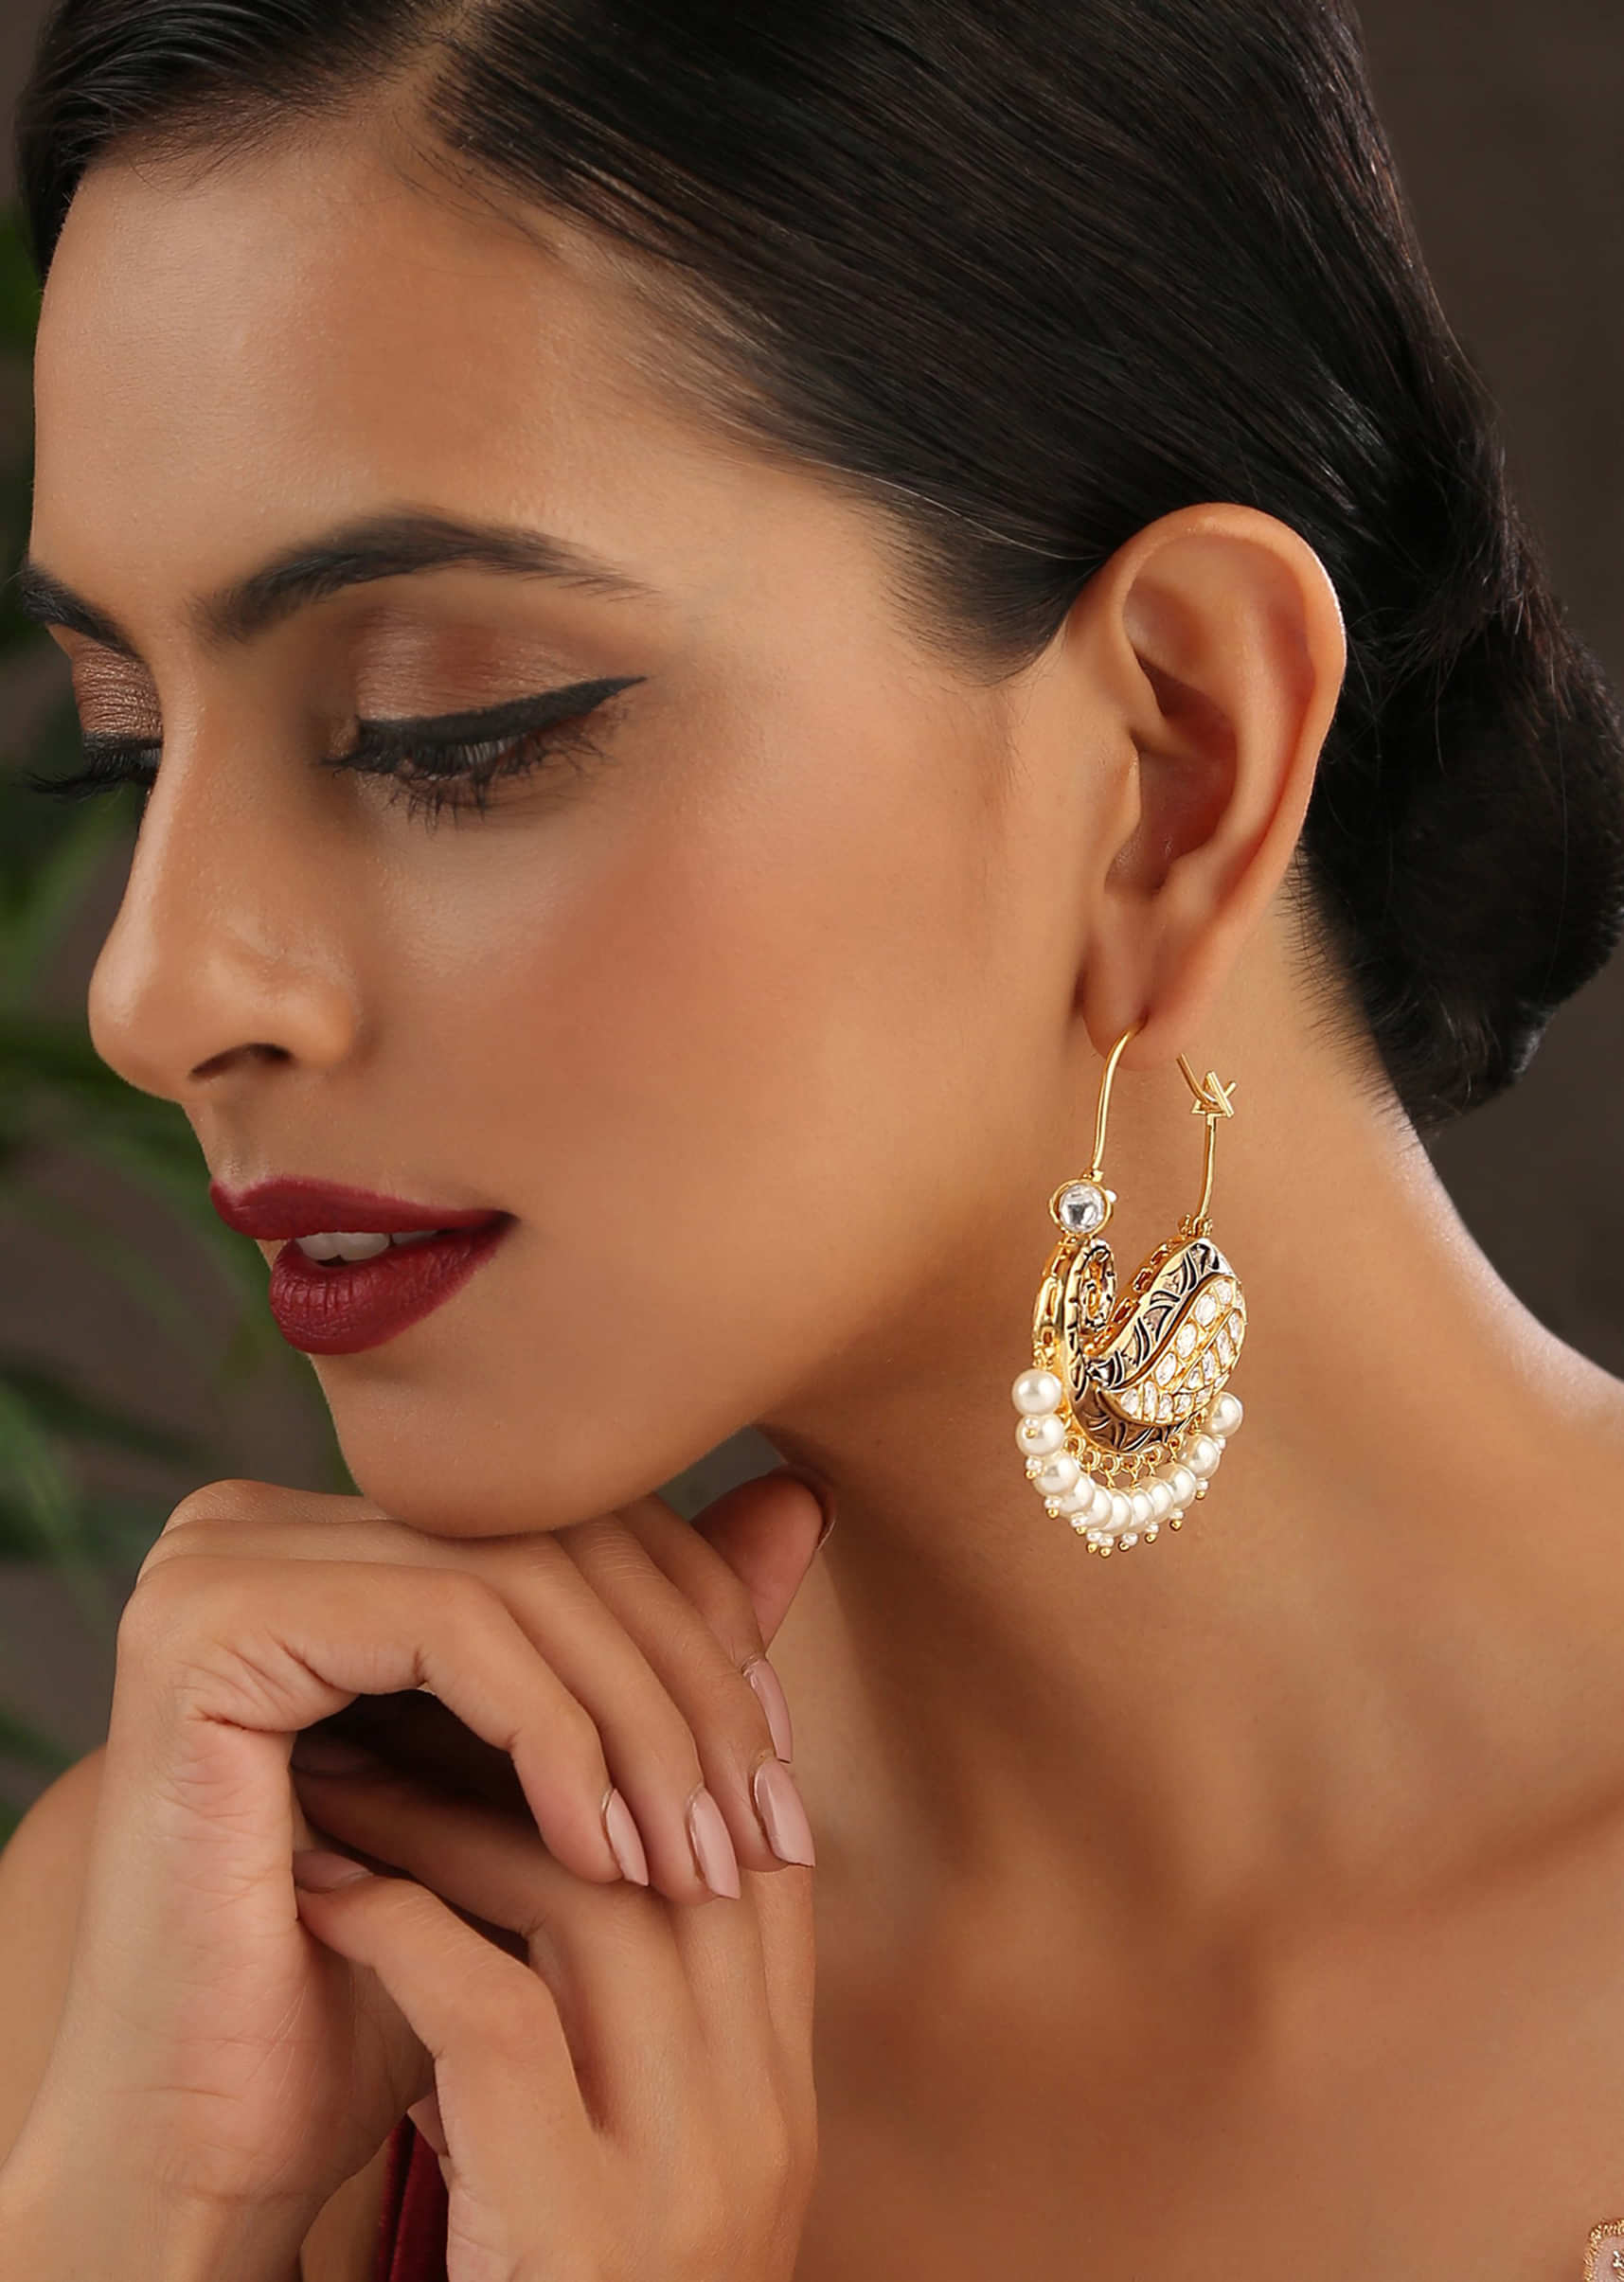 Gold Plated Earrings Featuring Kundan, Minakari And Embossed Intricate Pattern By Paisley Pop